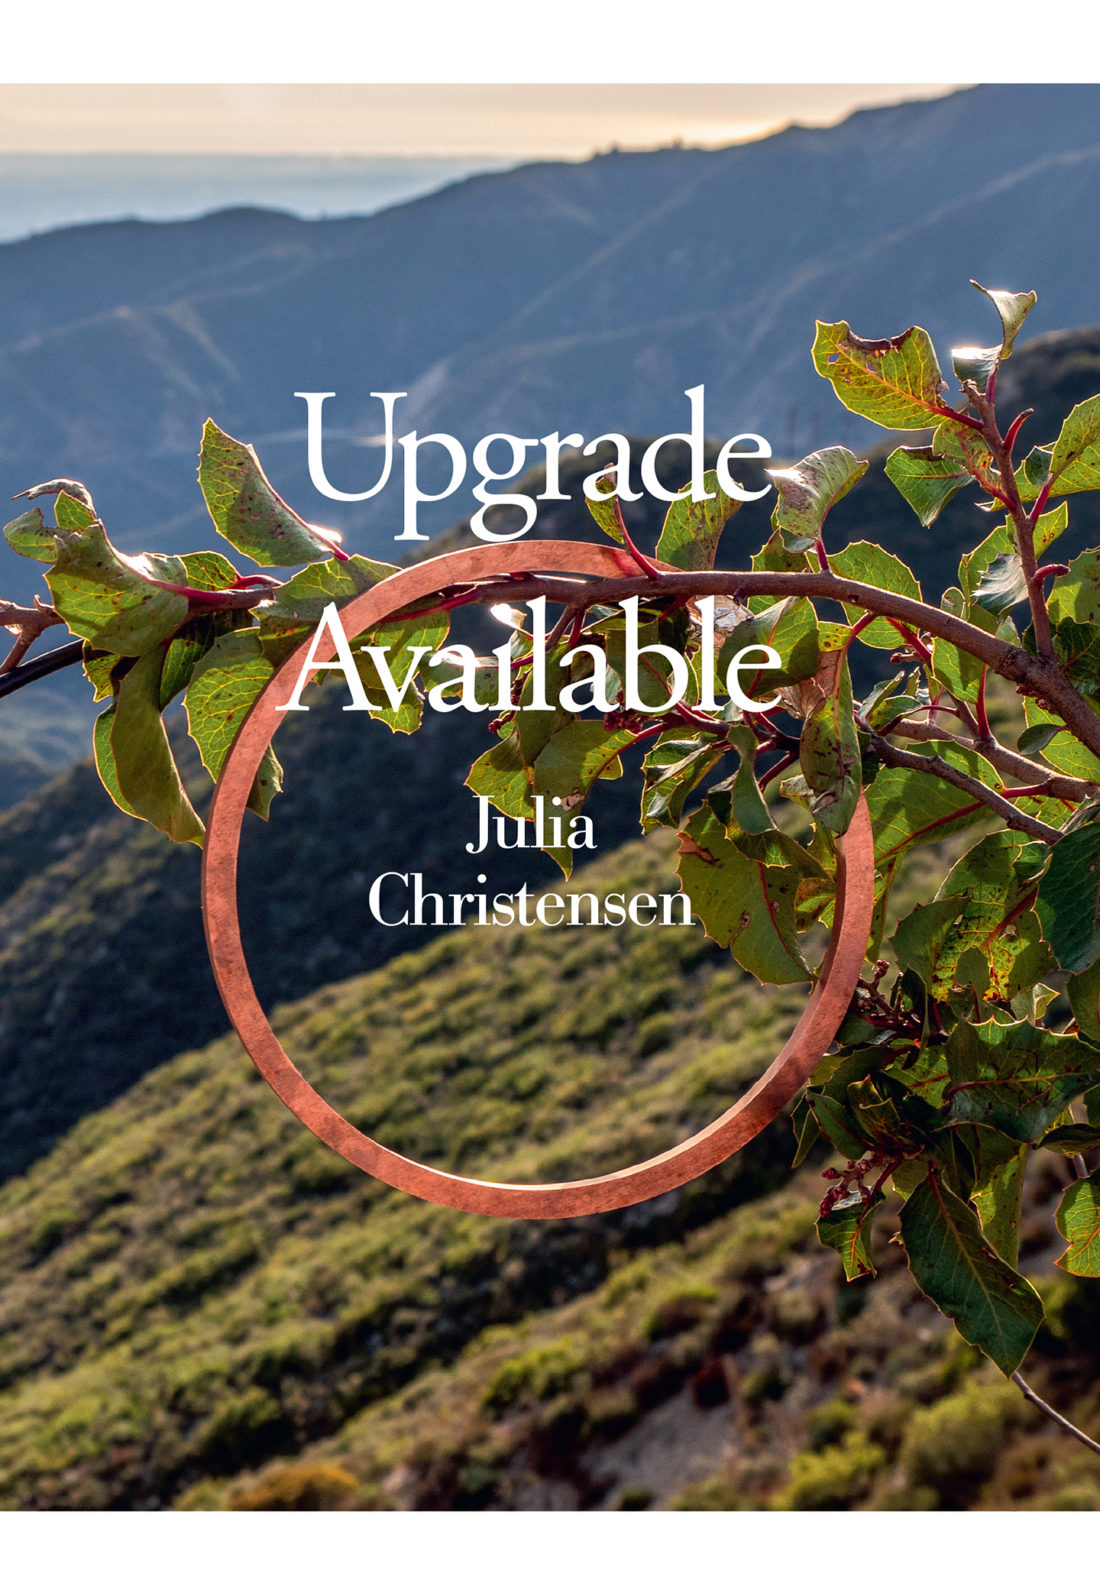 Upgrade Available (2020, Dancing Foxes Press)